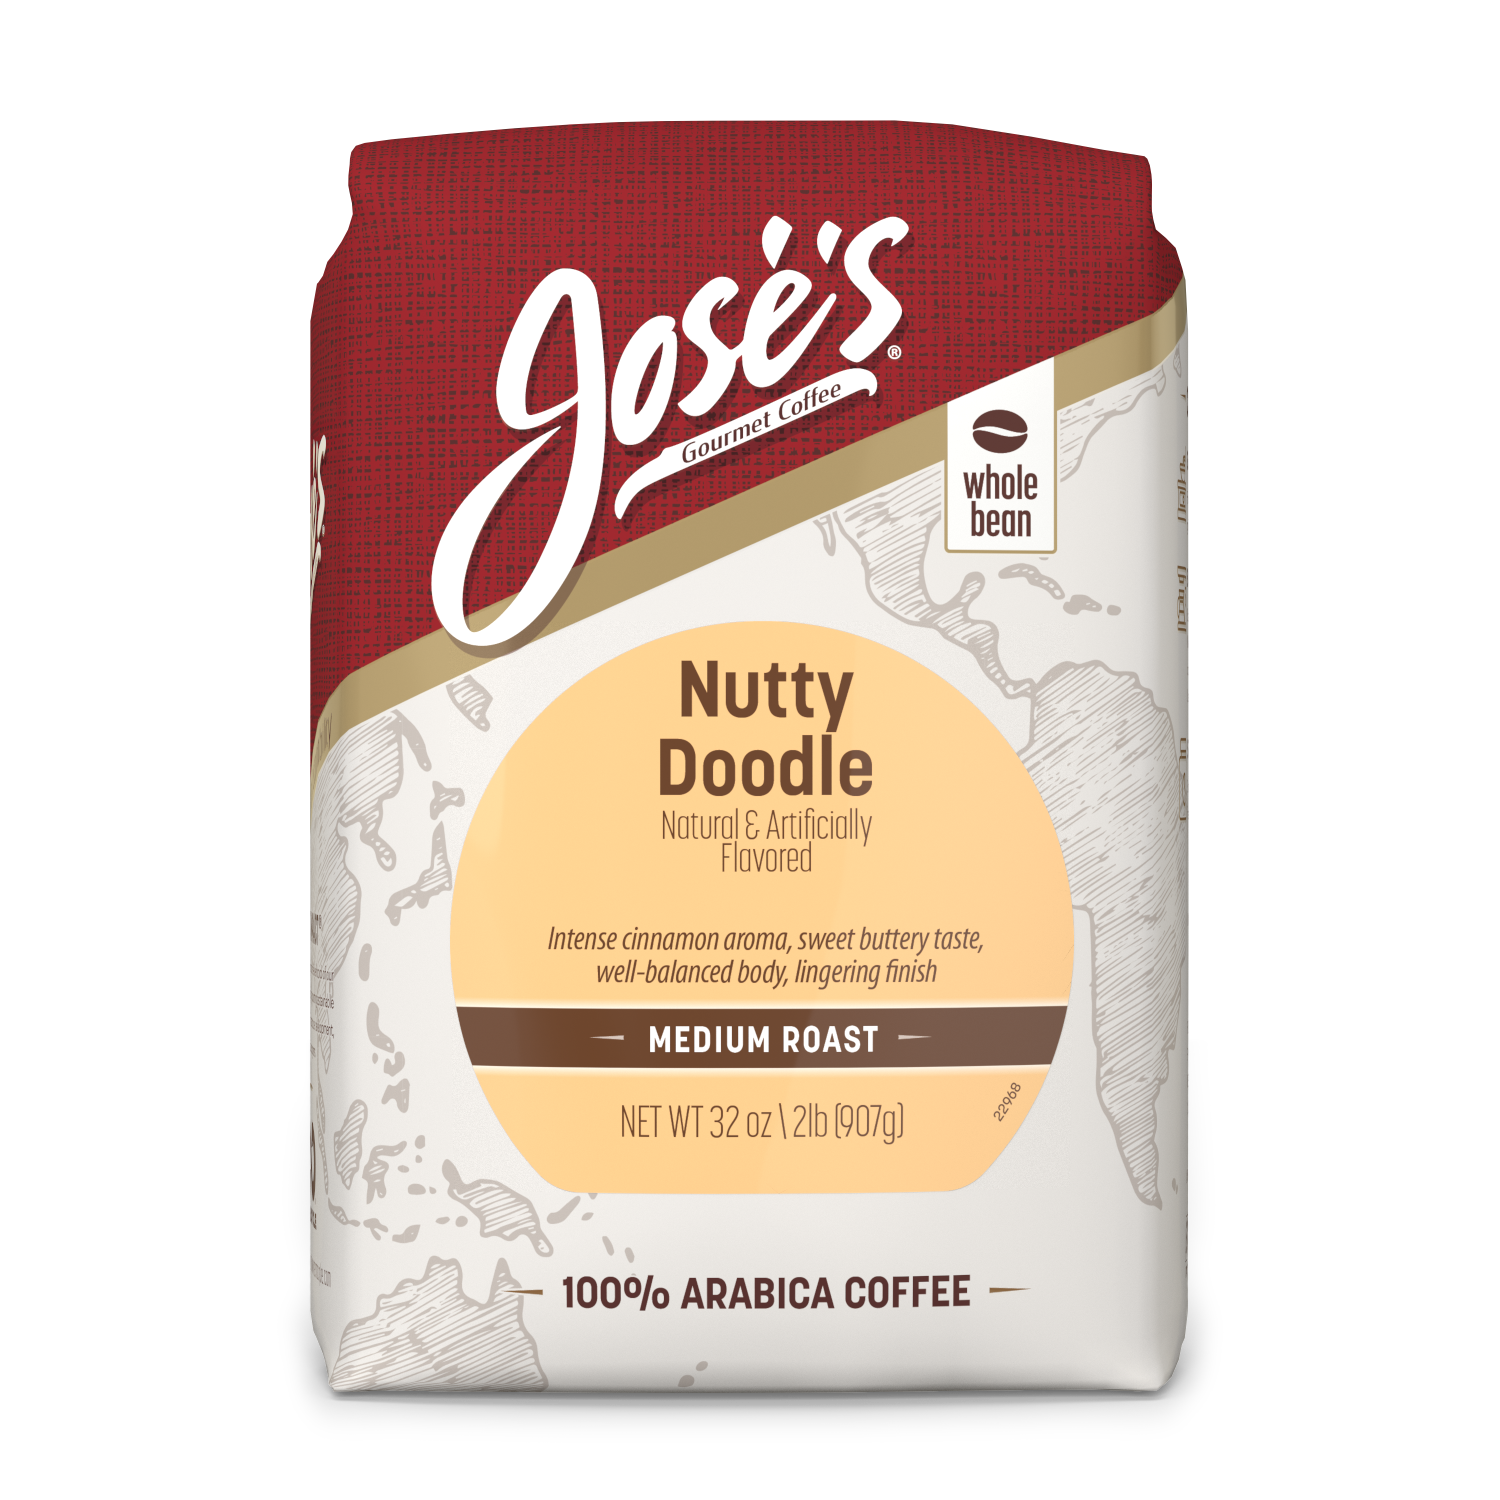 Joses Gourmet Coffee Nutty Doodle